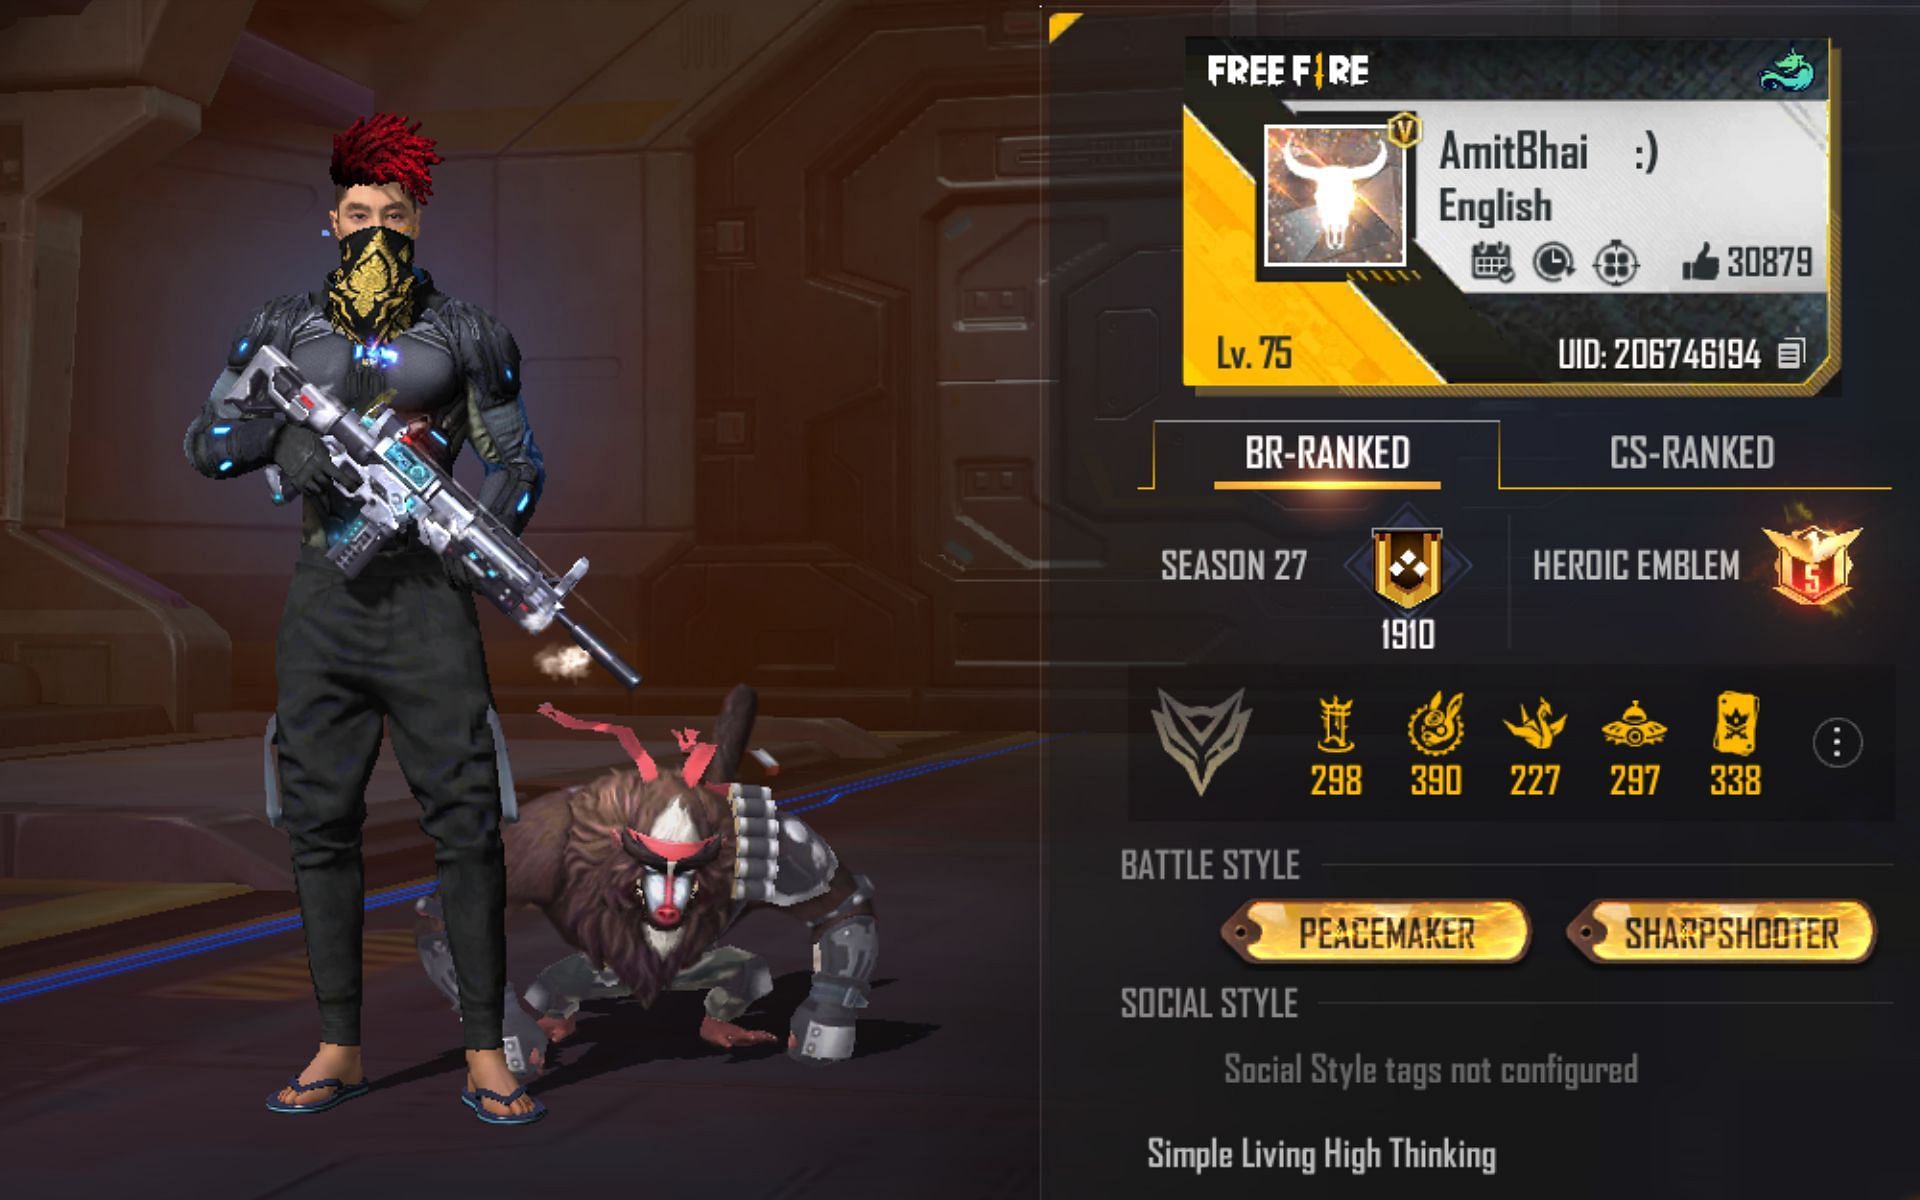 Amitbhai has the V Badge in his Free Fire ID (Image via Garena)